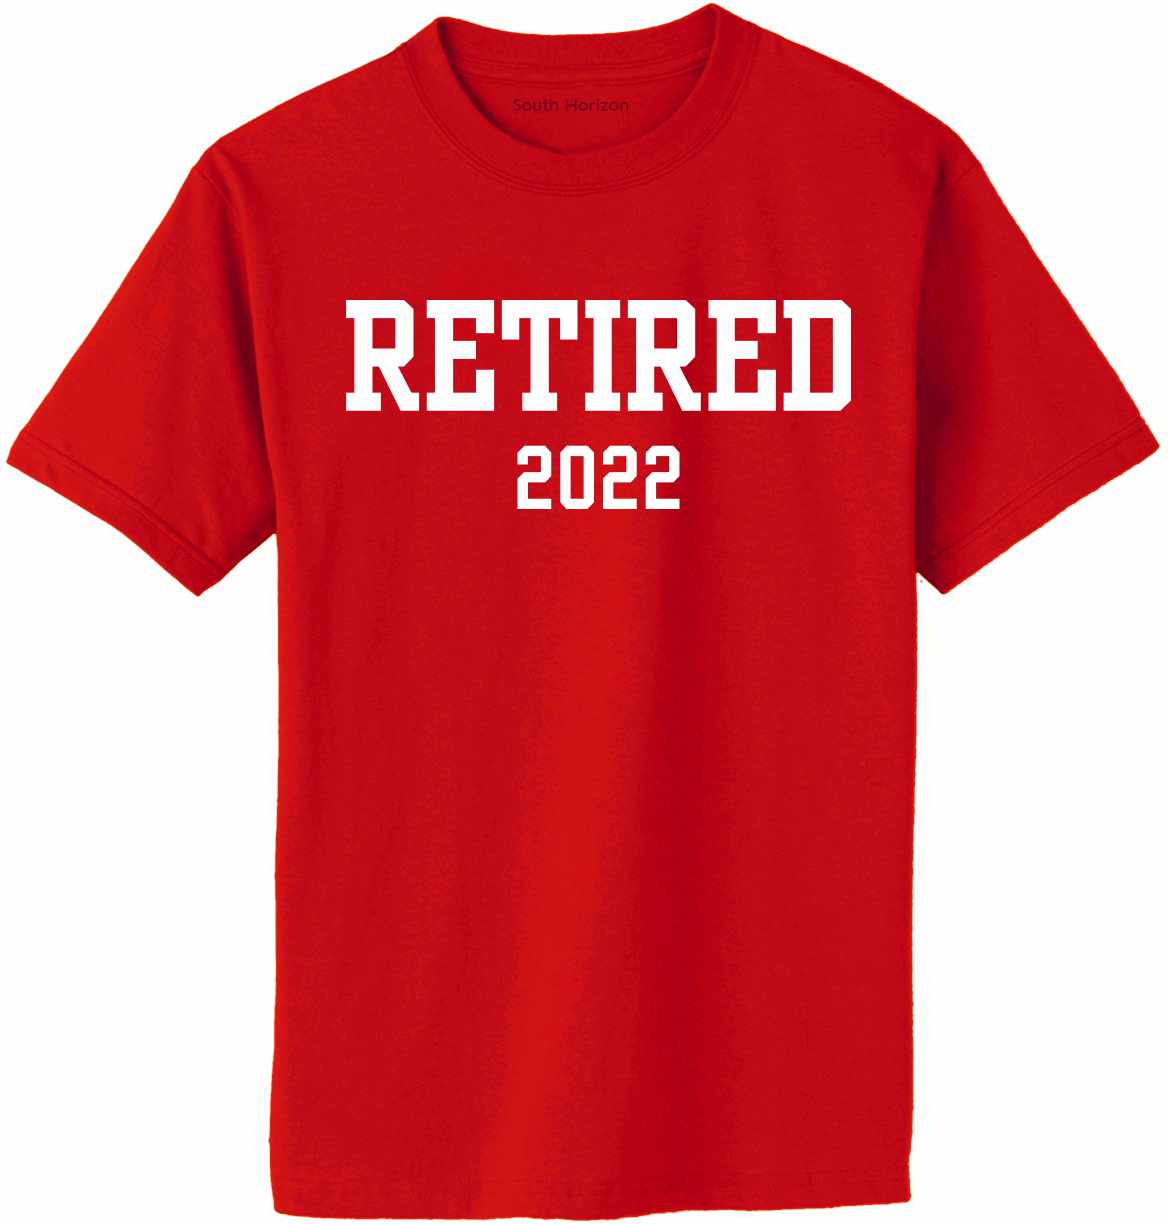 Retired 2022 on Adult T-Shirt